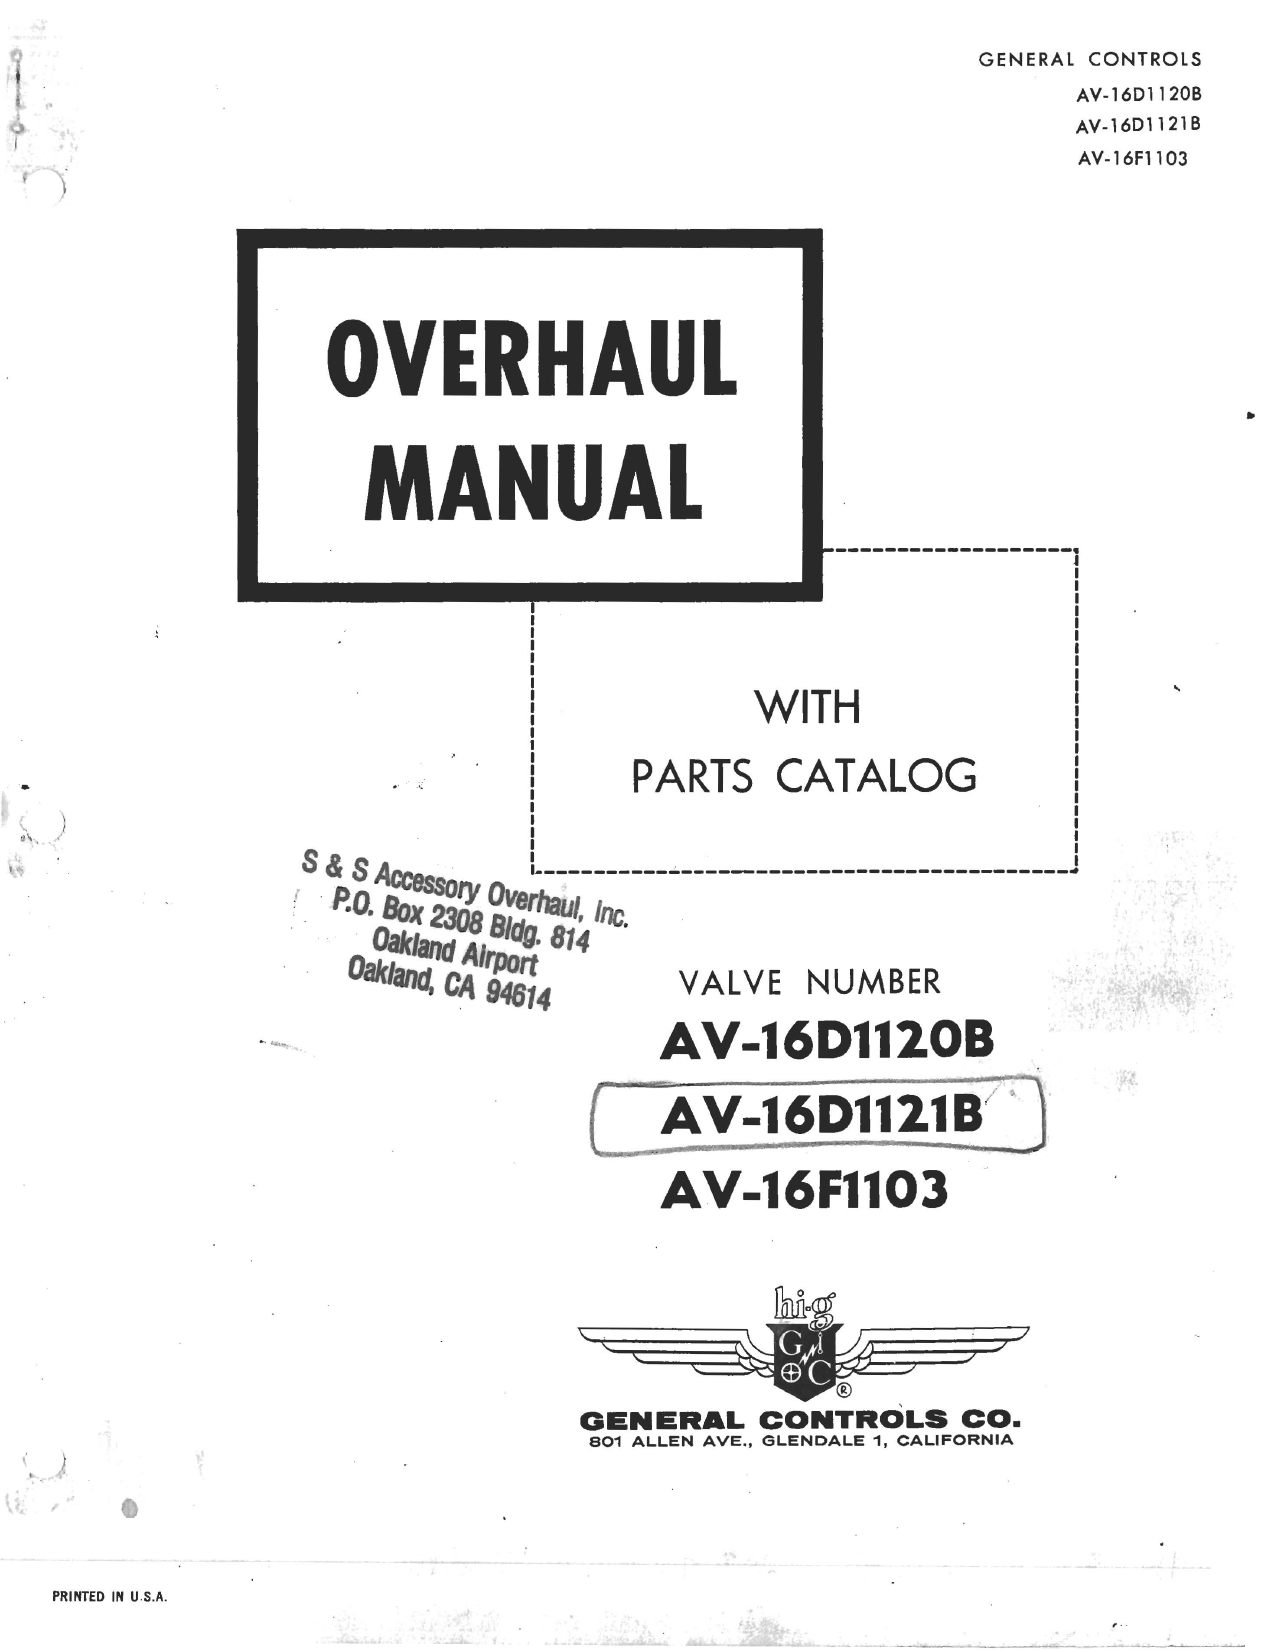 Sample page 1 from AirCorps Library document: Overhaul Manual with Parts Catalog for - Manually Operated Rotary Plug Valve  AV-16D1120B, Pull Out Valve AV-16D1121B, and Housing Assembly AV-16F1103